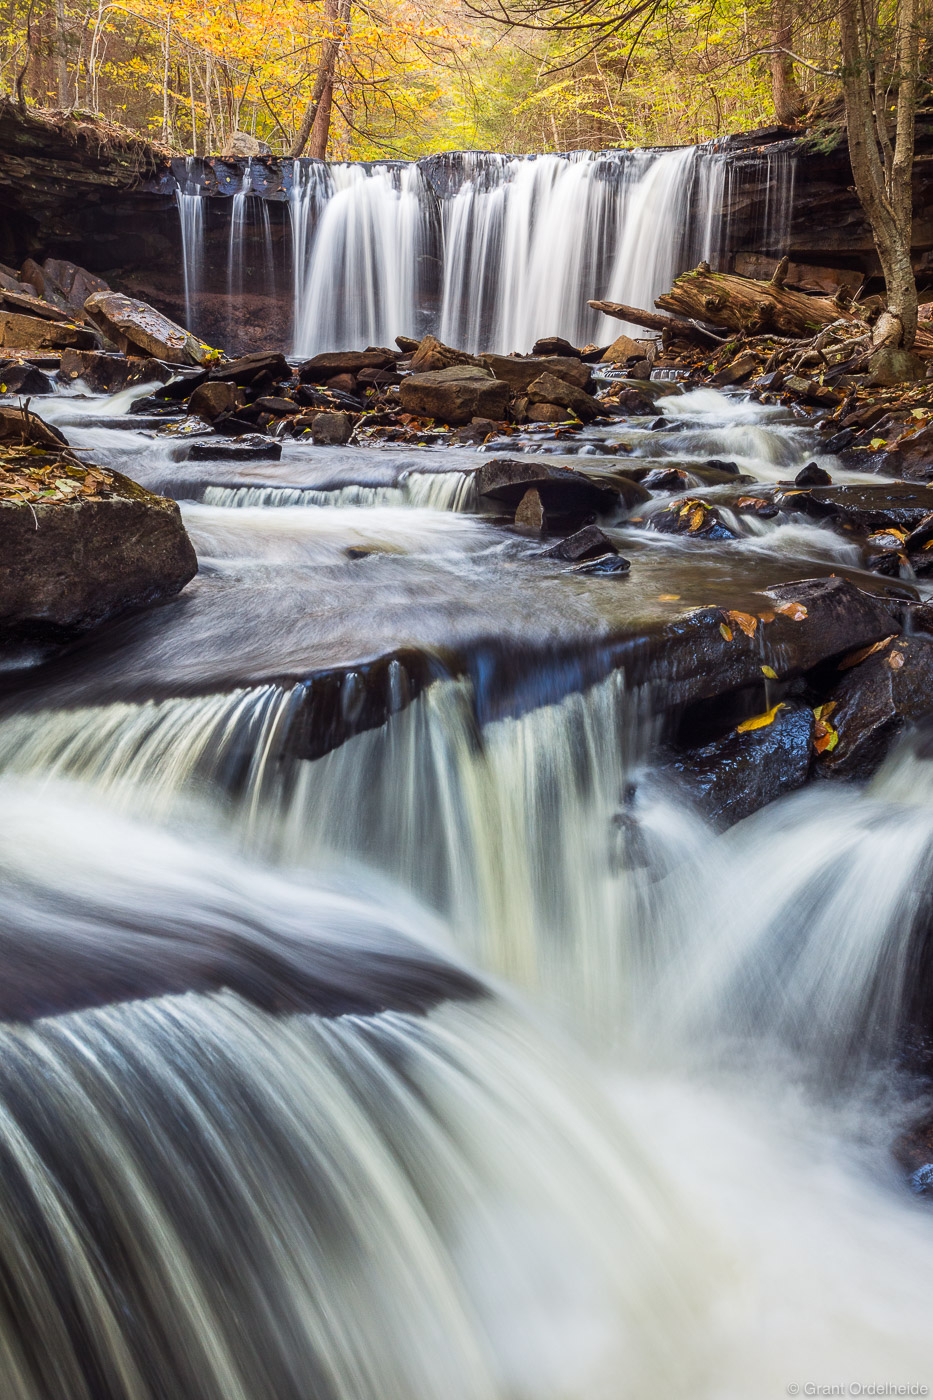 Fall foliage and cascading waterfalls in Pennsylvania's Ricketts Glen State Park.